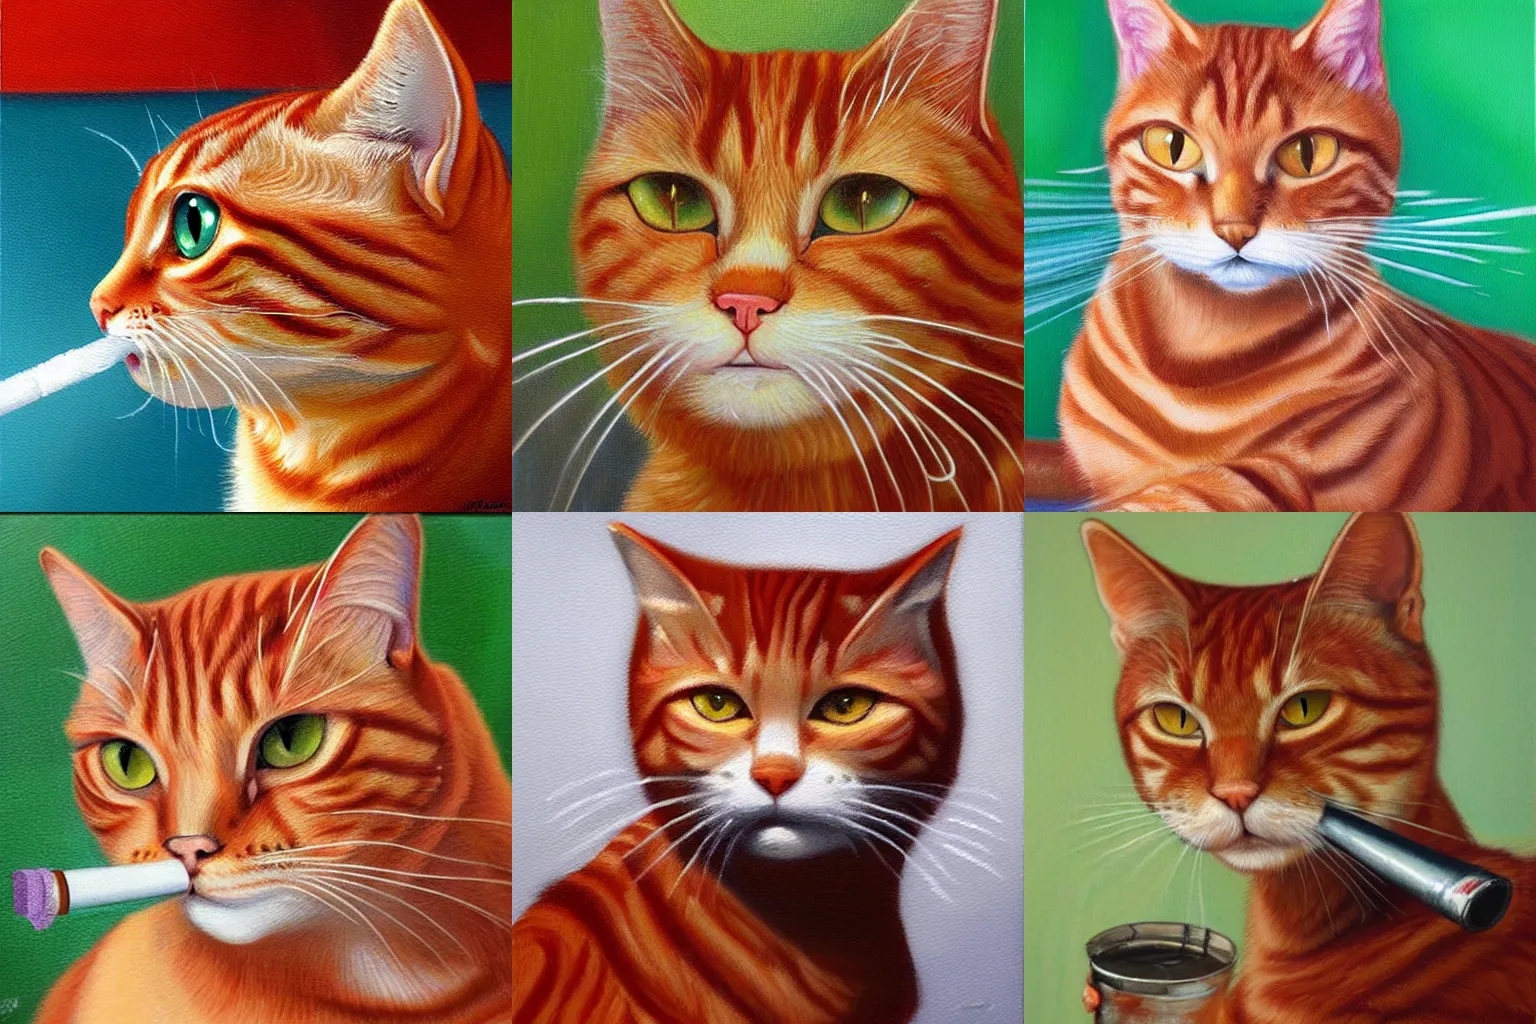 Prompt: a highly detailed oil painting of a red tabby cat smoking a cigarette, in the style of Memphis,